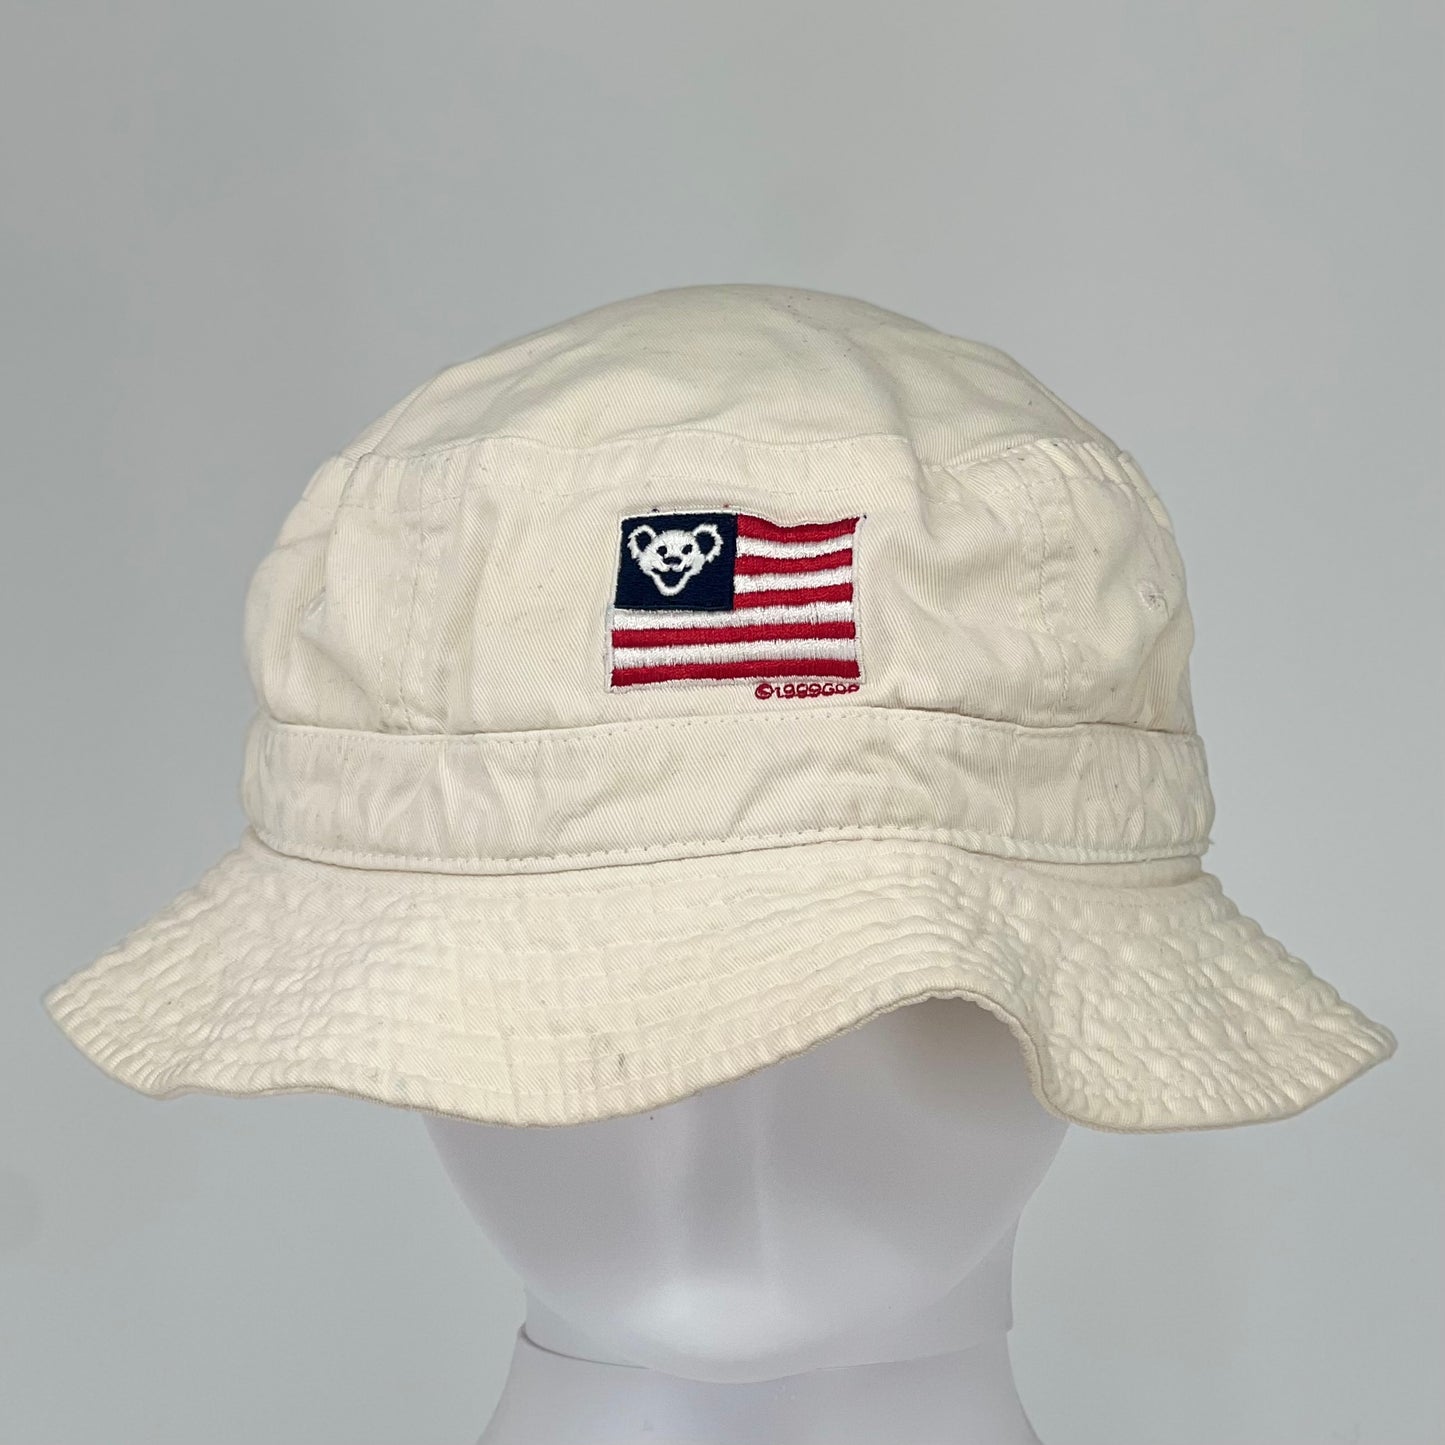 Vintage 1999 Grateful Dead Productions Embroidered Bucket Hat Dancing Bears American Flag